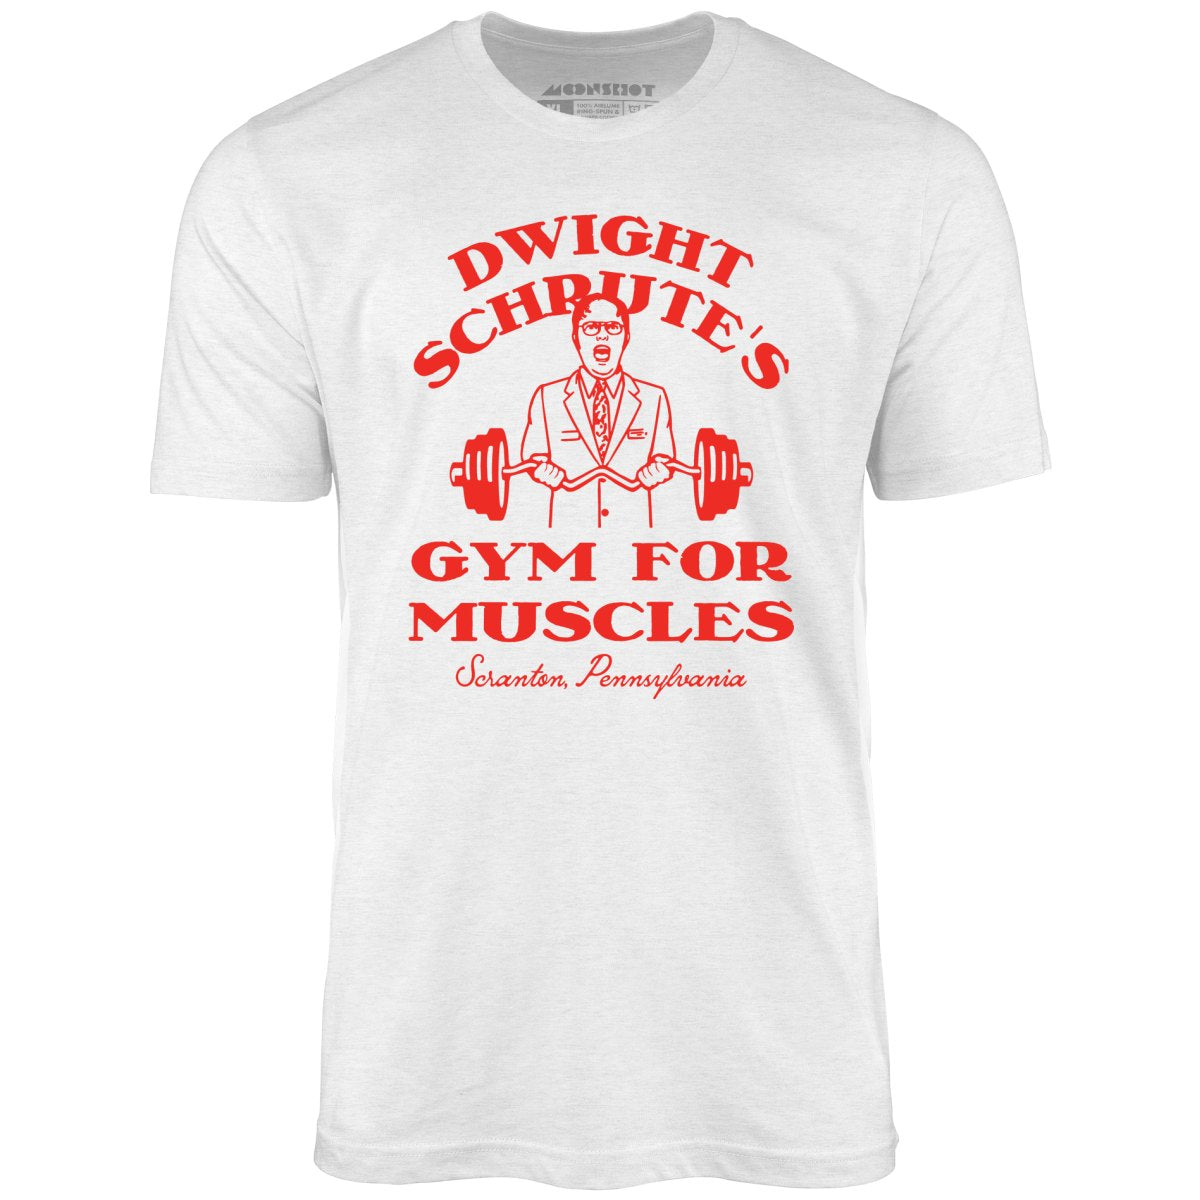 Dwight Schrute's Gym For Muscles - Unisex T-Shirt